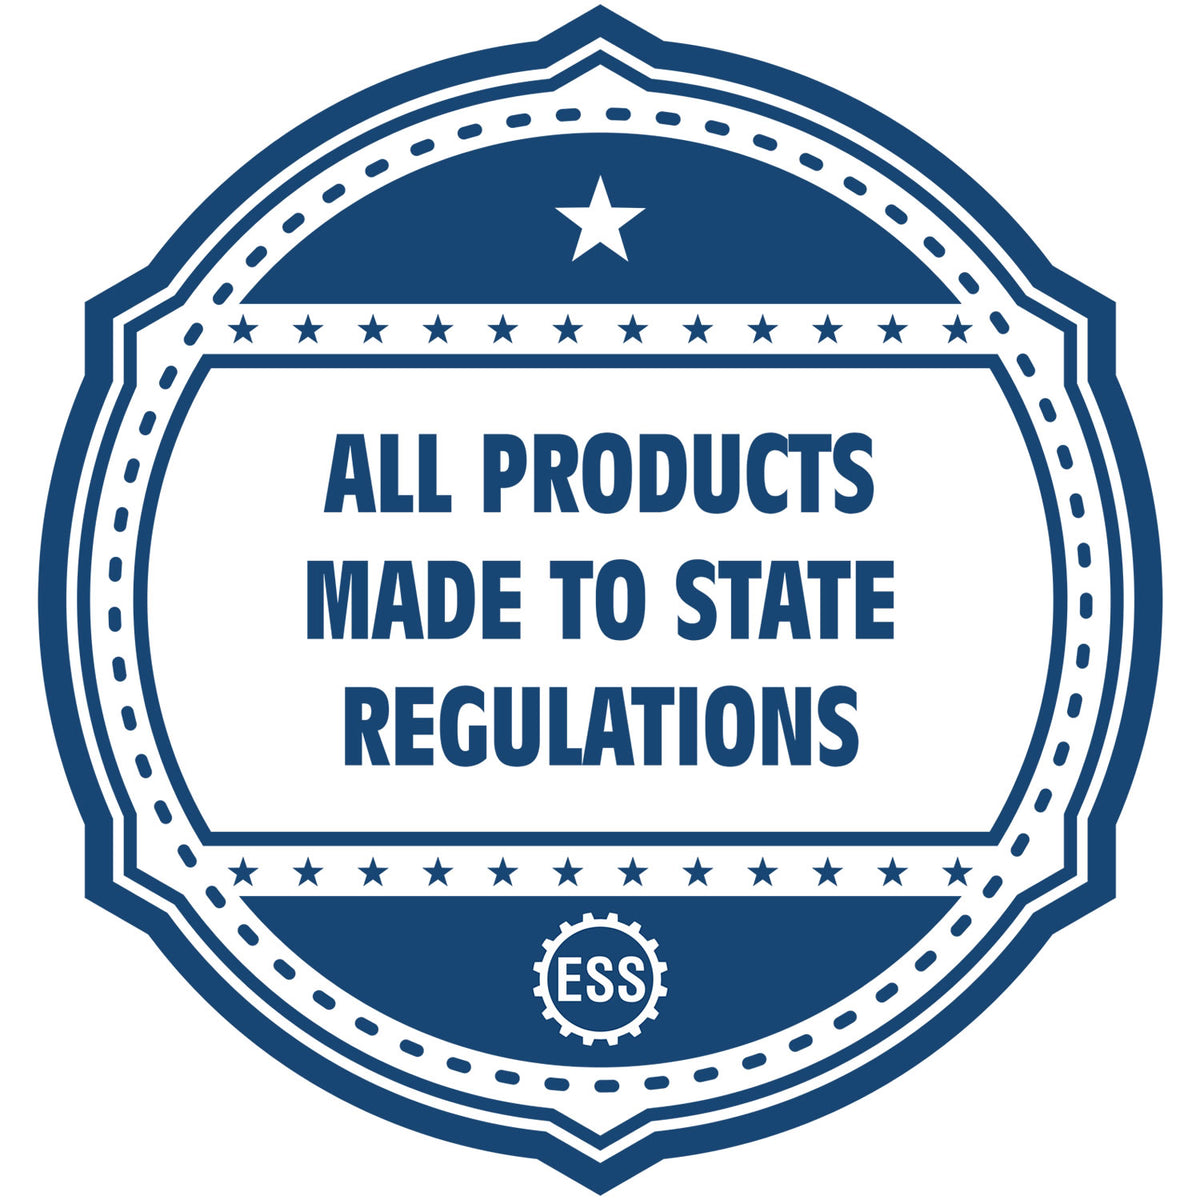 An icon or badge element for the New Jersey Professional Engineer Seal Stamp showing that this product is made in compliance with state regulations.